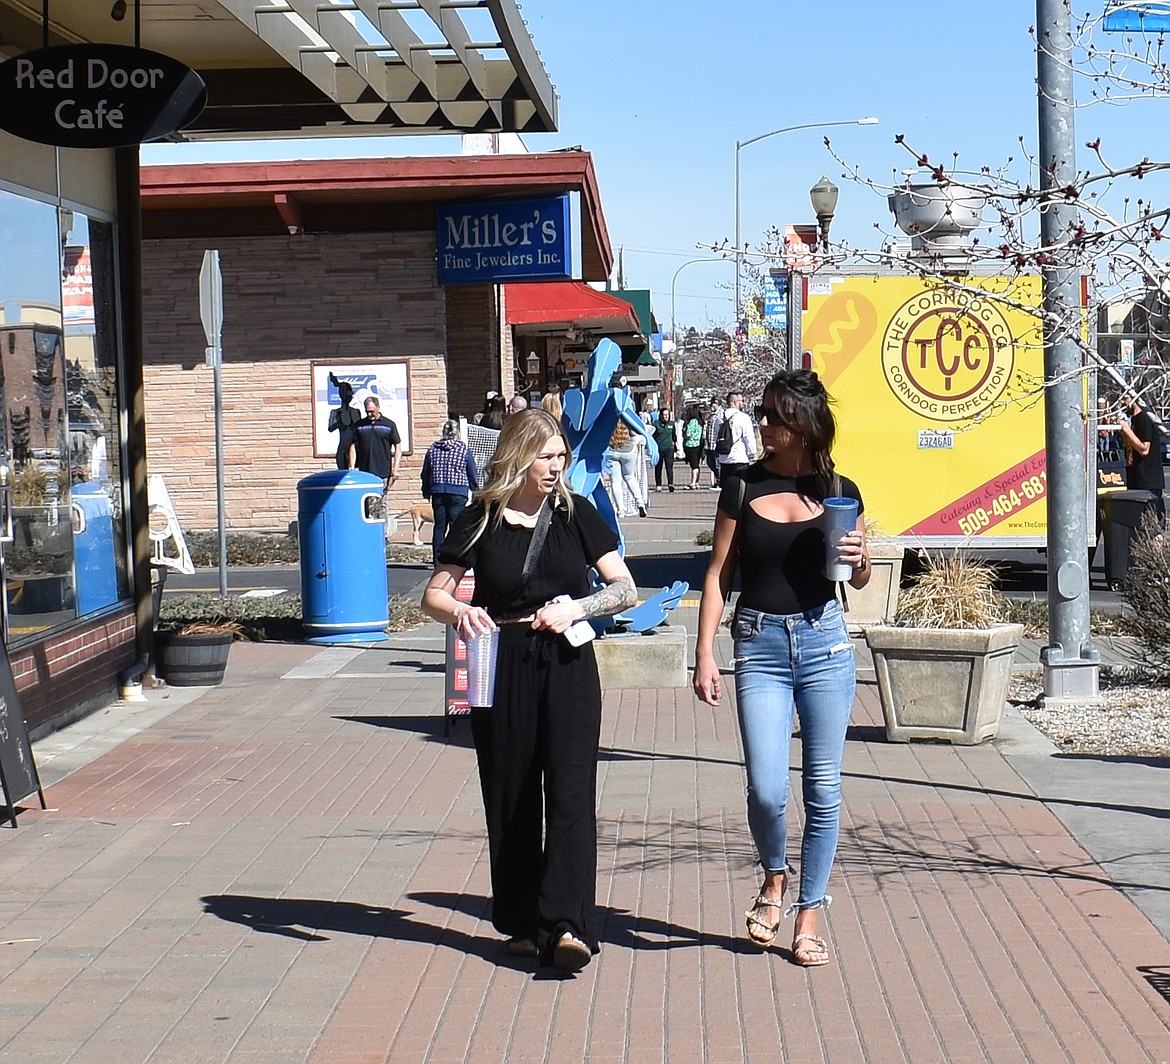 Macaela Hayes, left, and Kamren Hicks enjoy the sunshine downtown at Brews and Tunes Saturday. They weren’t able to get tickets for the beer tasting, they said, but they stayed for the shopping anyway.